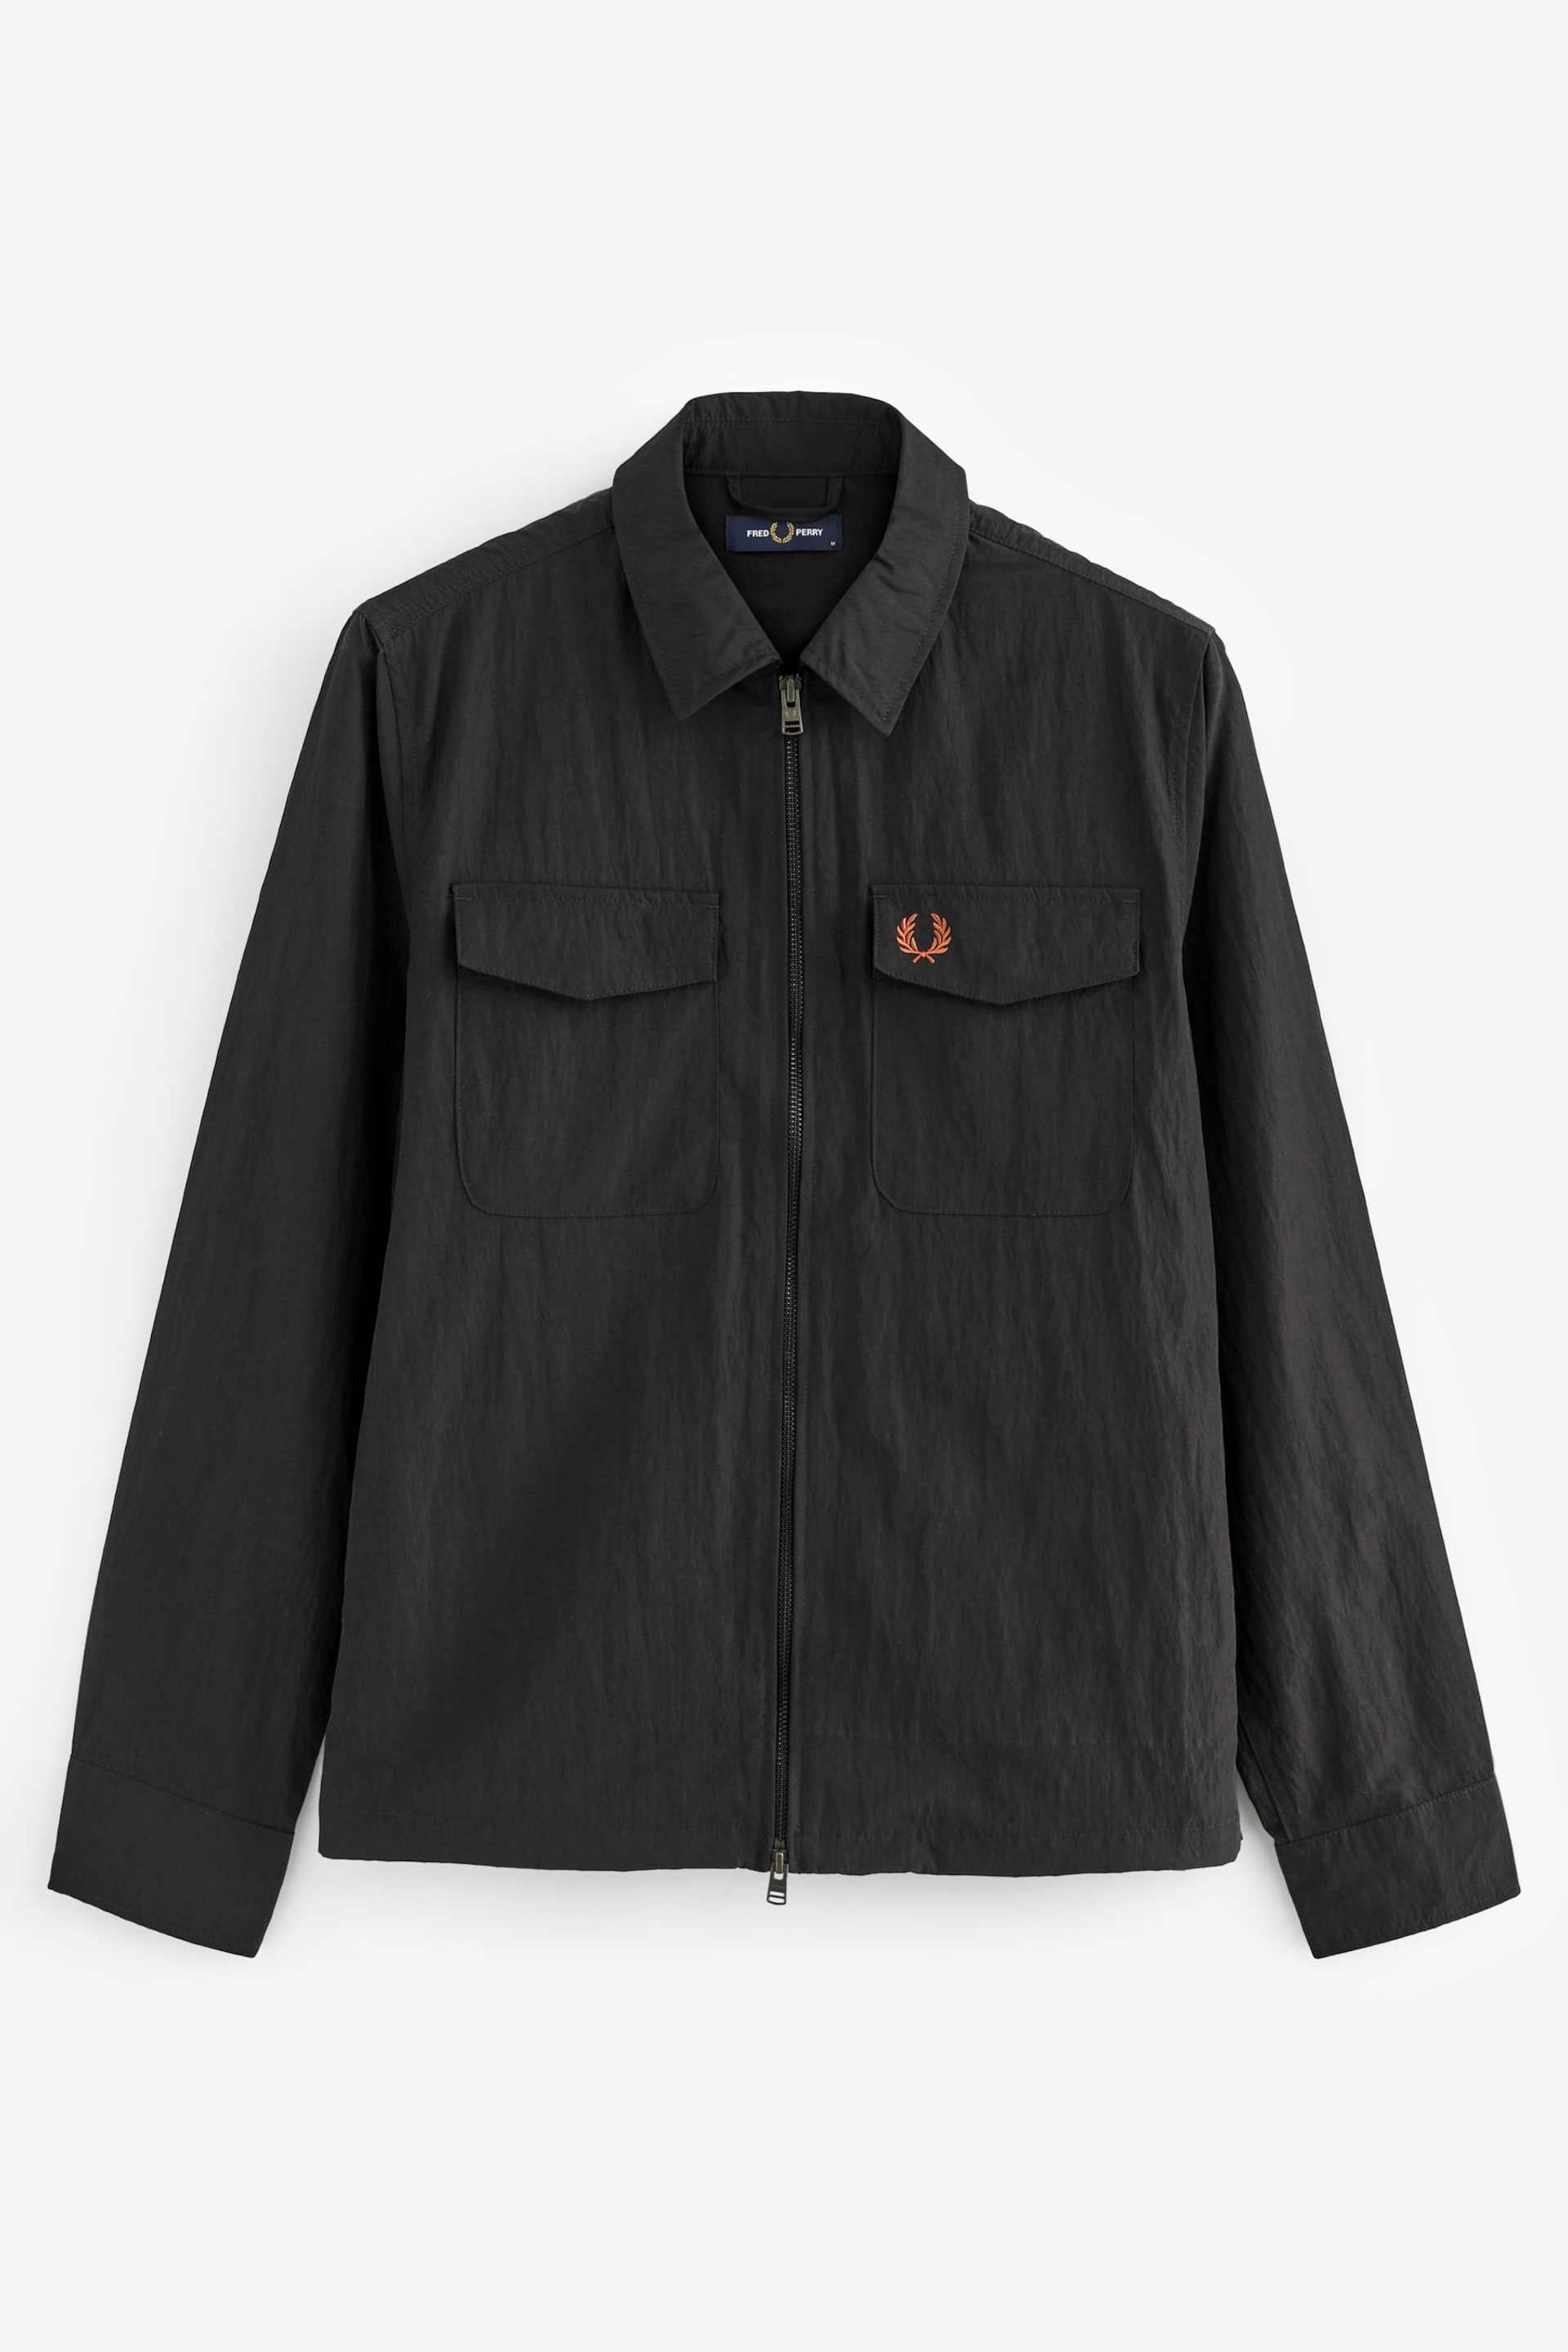 Fred Perry Zip Through Lightweight Black Overshirt - Image 5 of 7